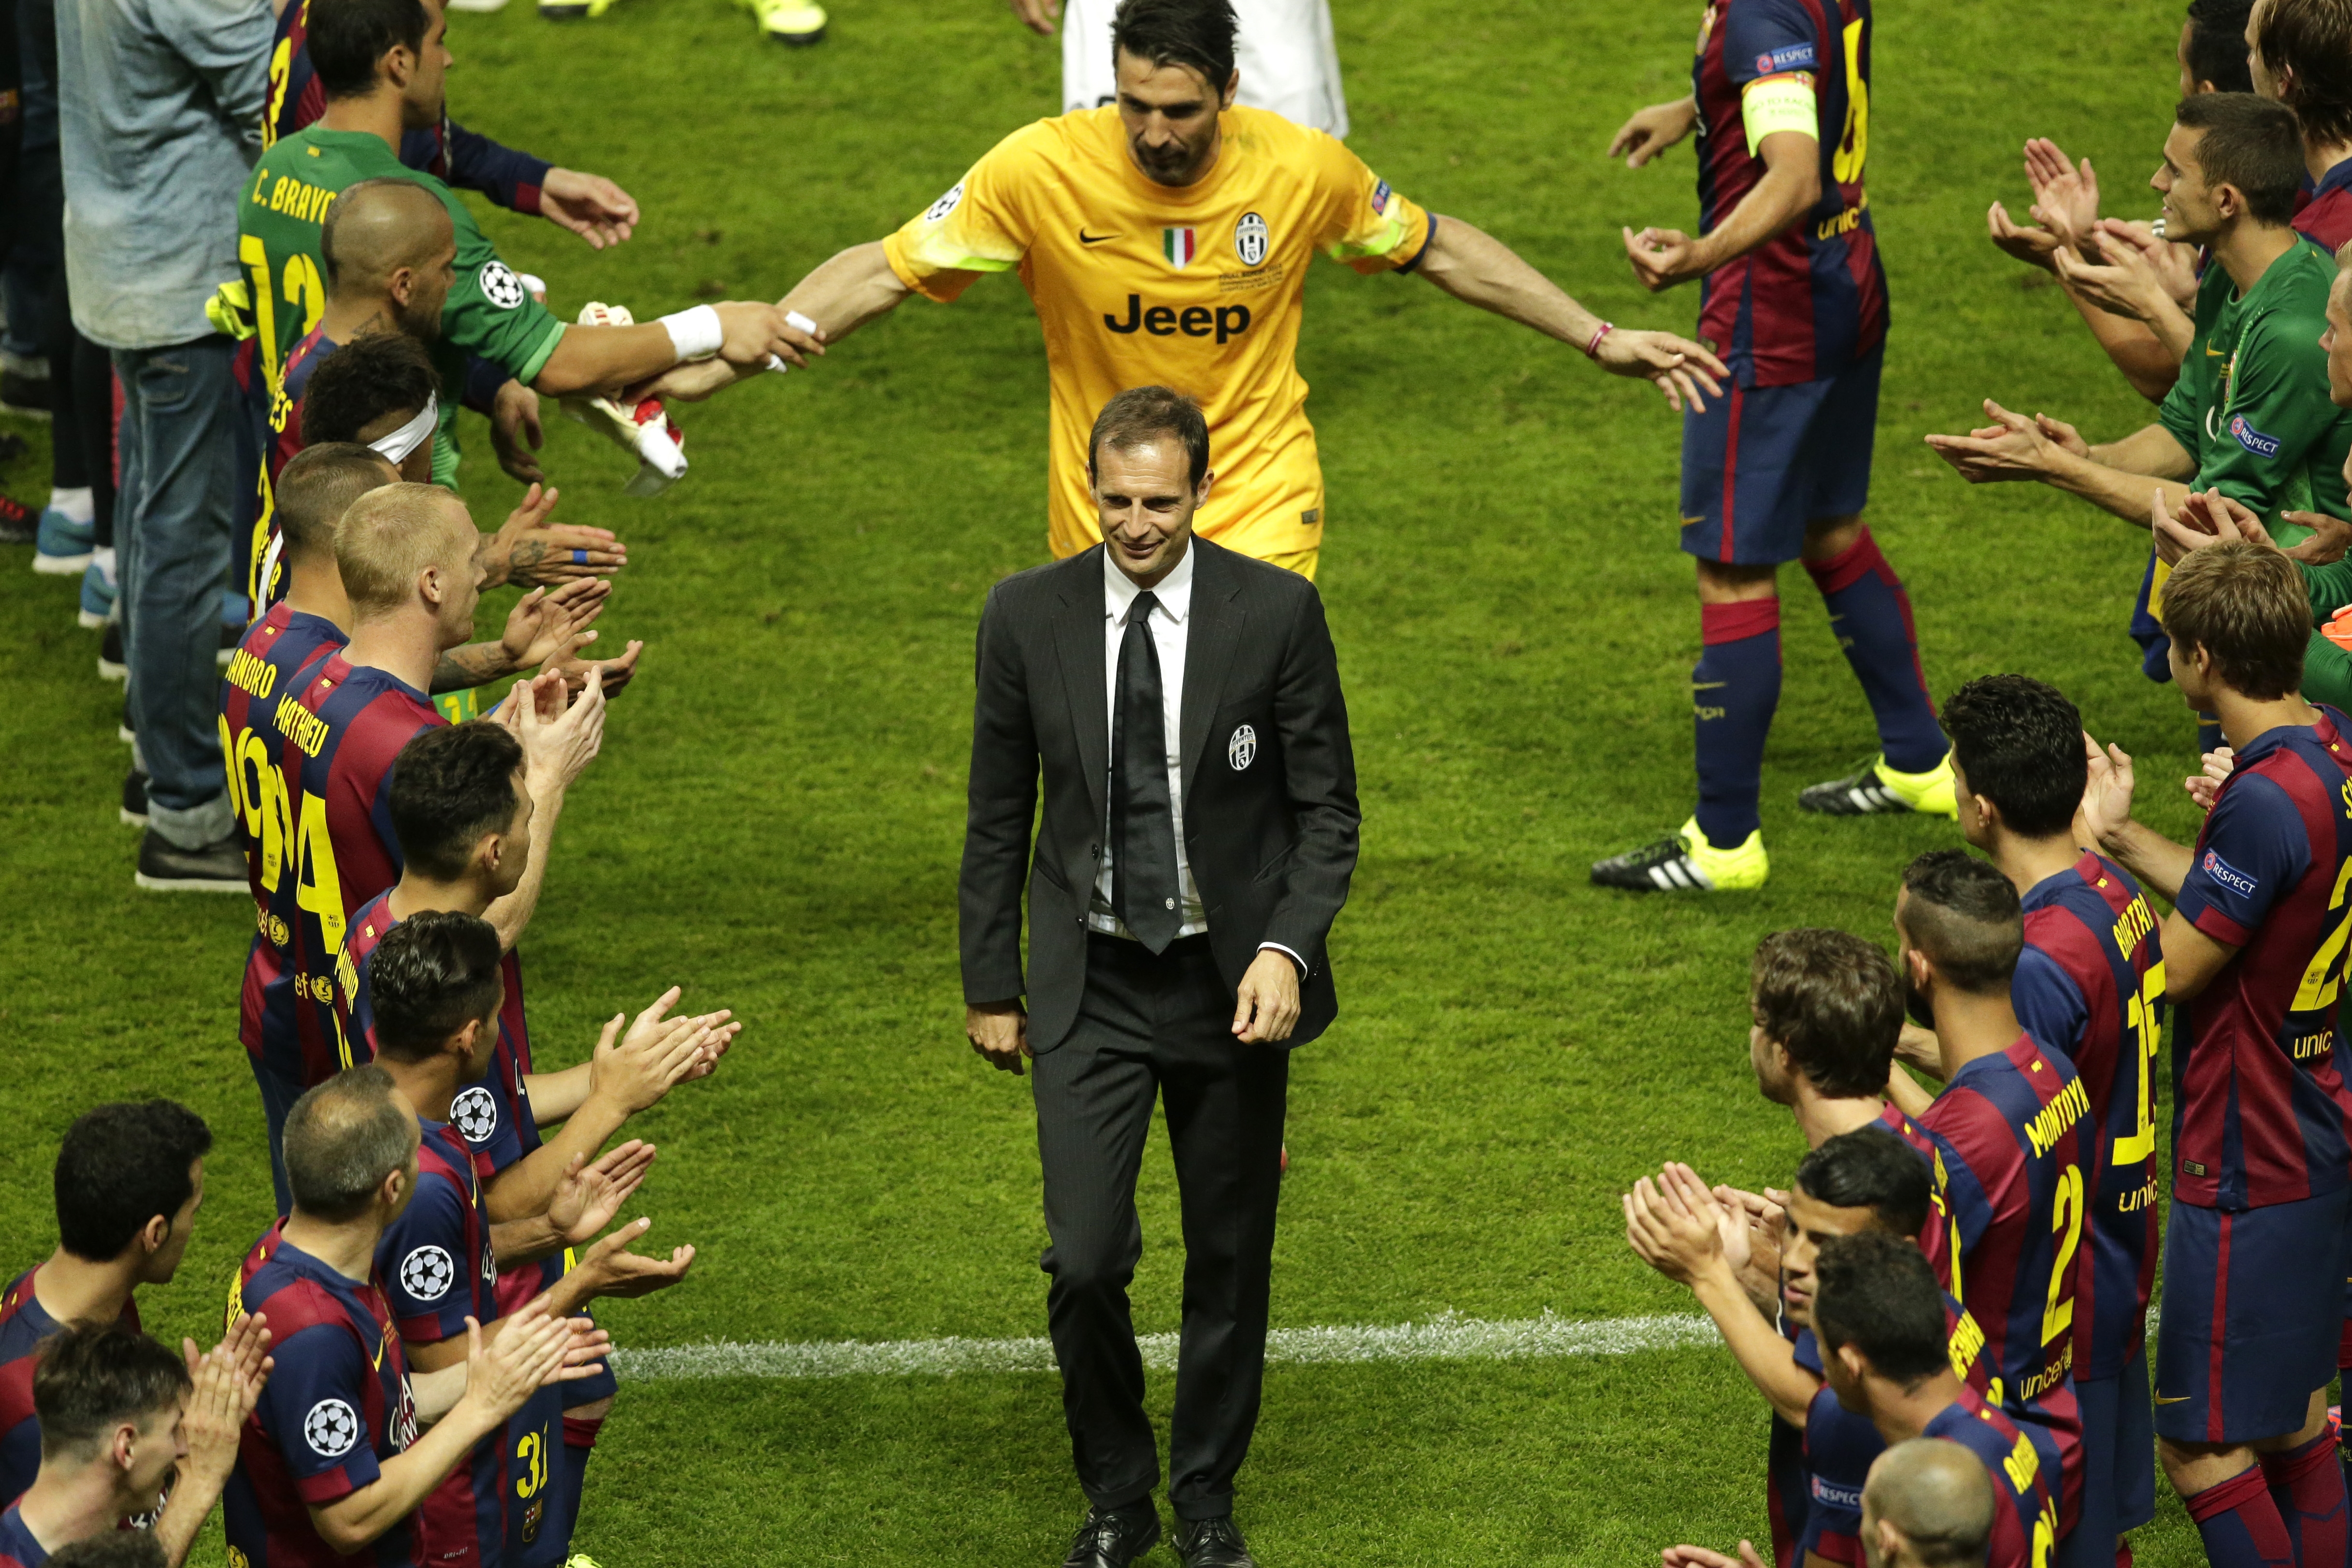 Barcelona players clap as Massimiliano Allegri leads his players off the field. Photo: AP